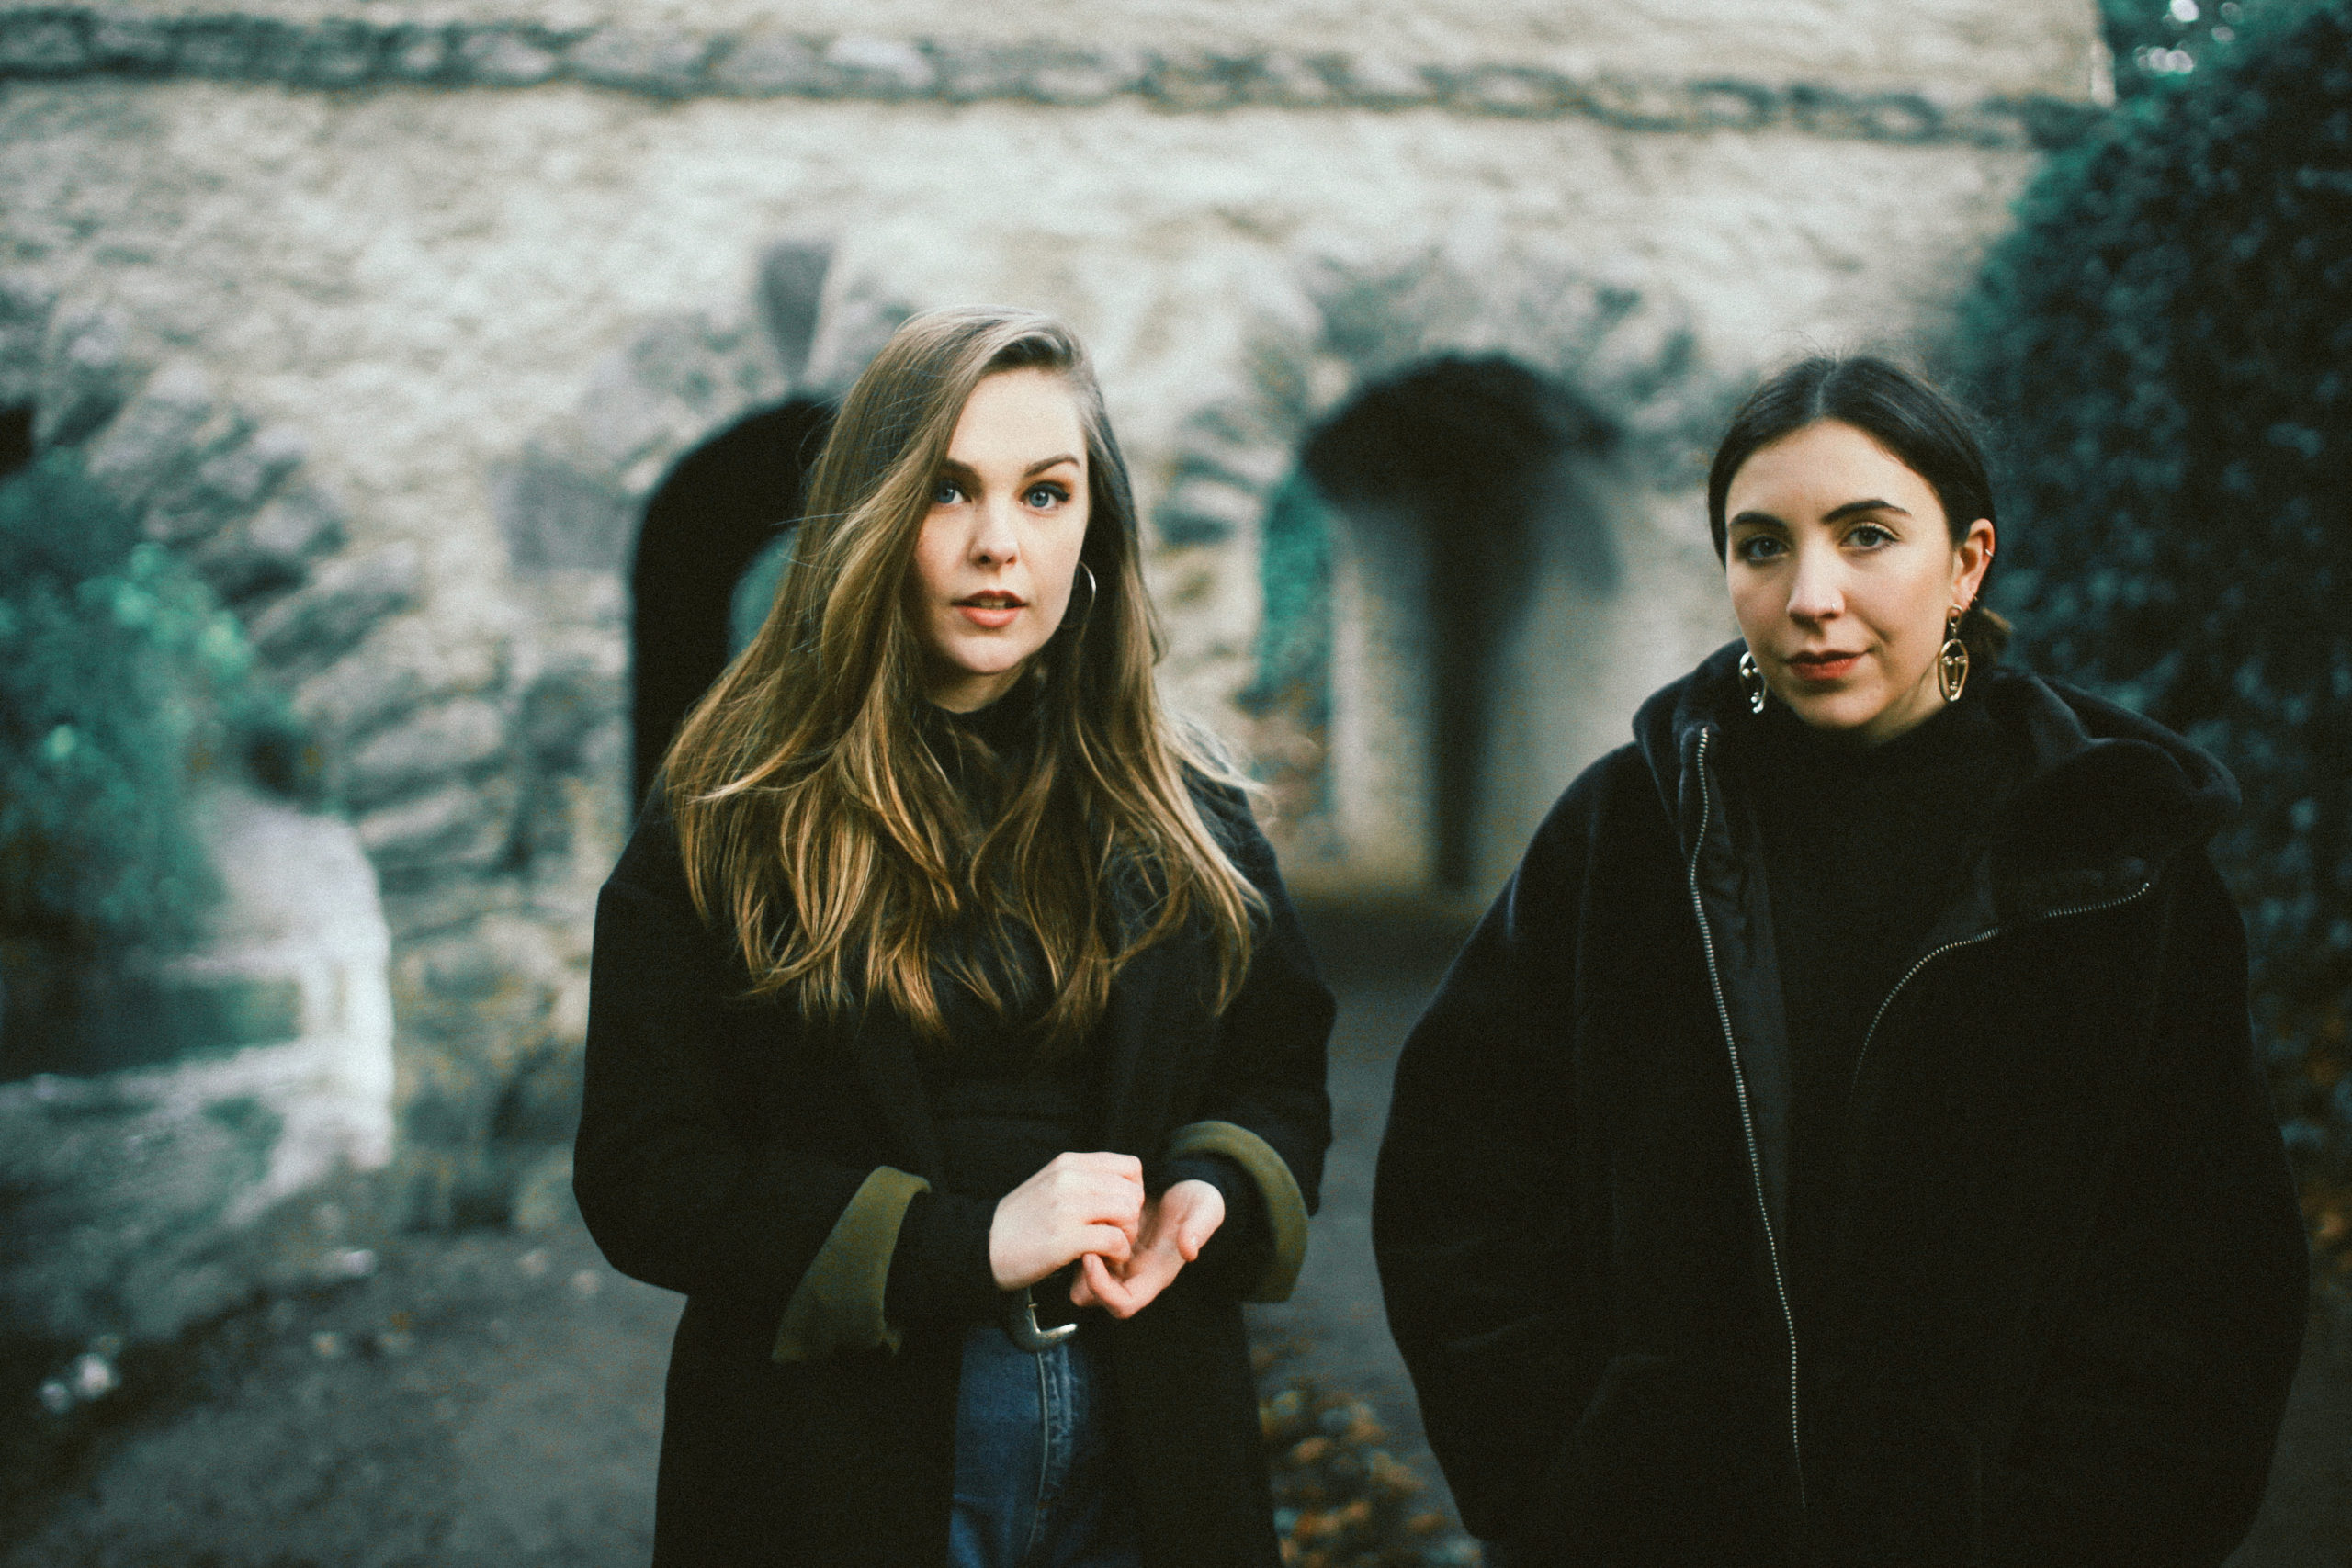 SAINT SISTER RELEASES THEIR DEBUT ALBUM SHAPE OF SILENCE – SF & LA SHOWS THIS WEEKEND, THEN THEY EMBARK ON 50 DATE WORLD TOUR – OPEN FOR HOZIER ACROSS EUROPE